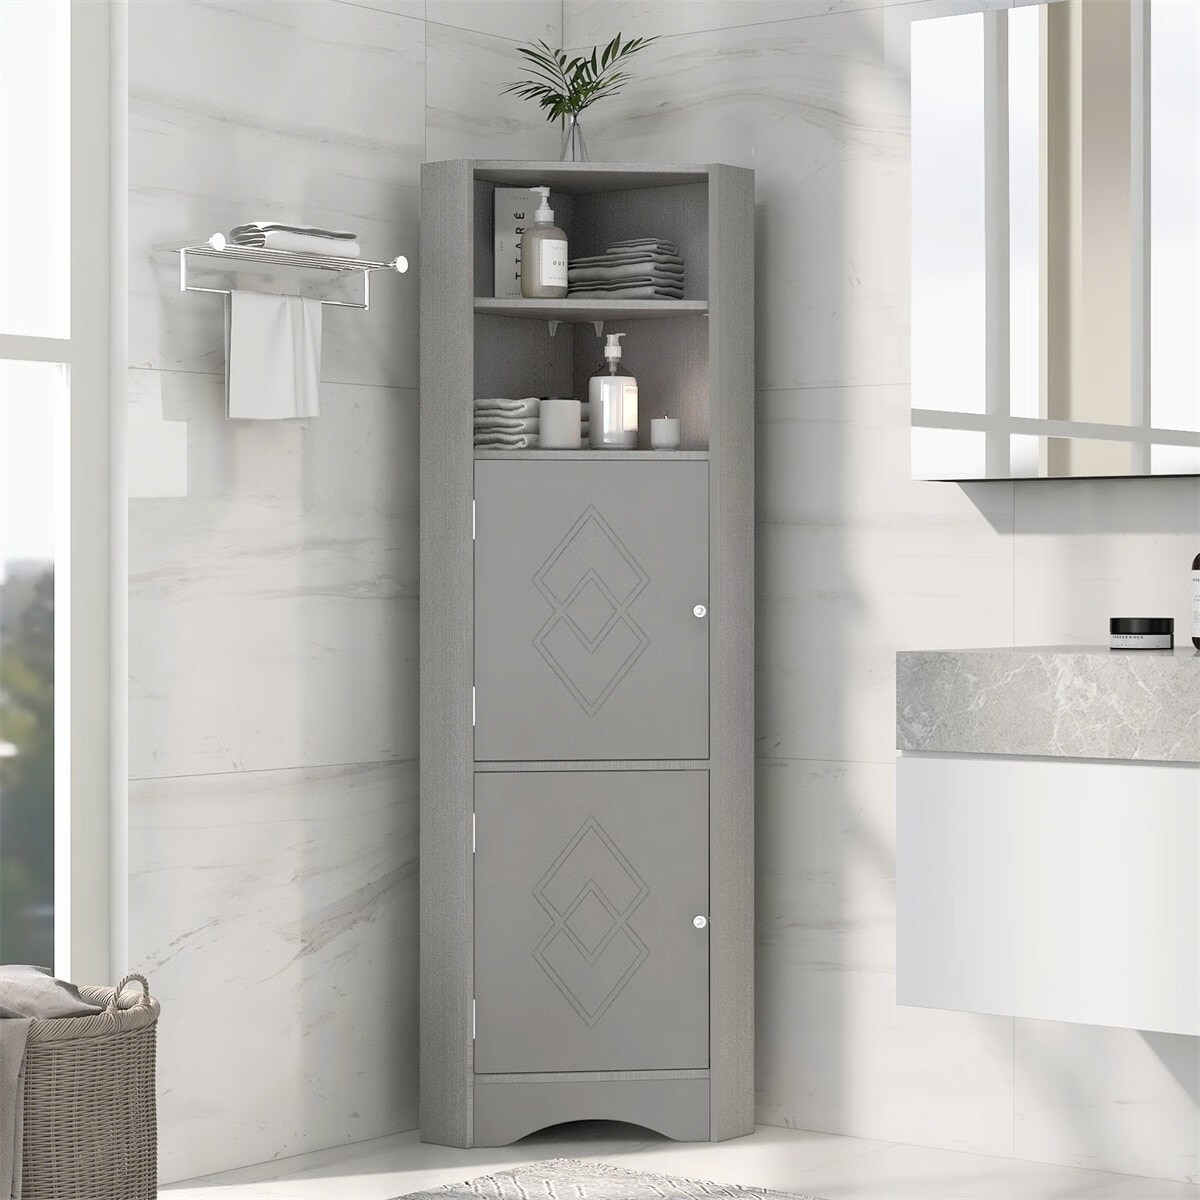 Magic Home Tall Bathroom Freestanding Storage Cabinet with